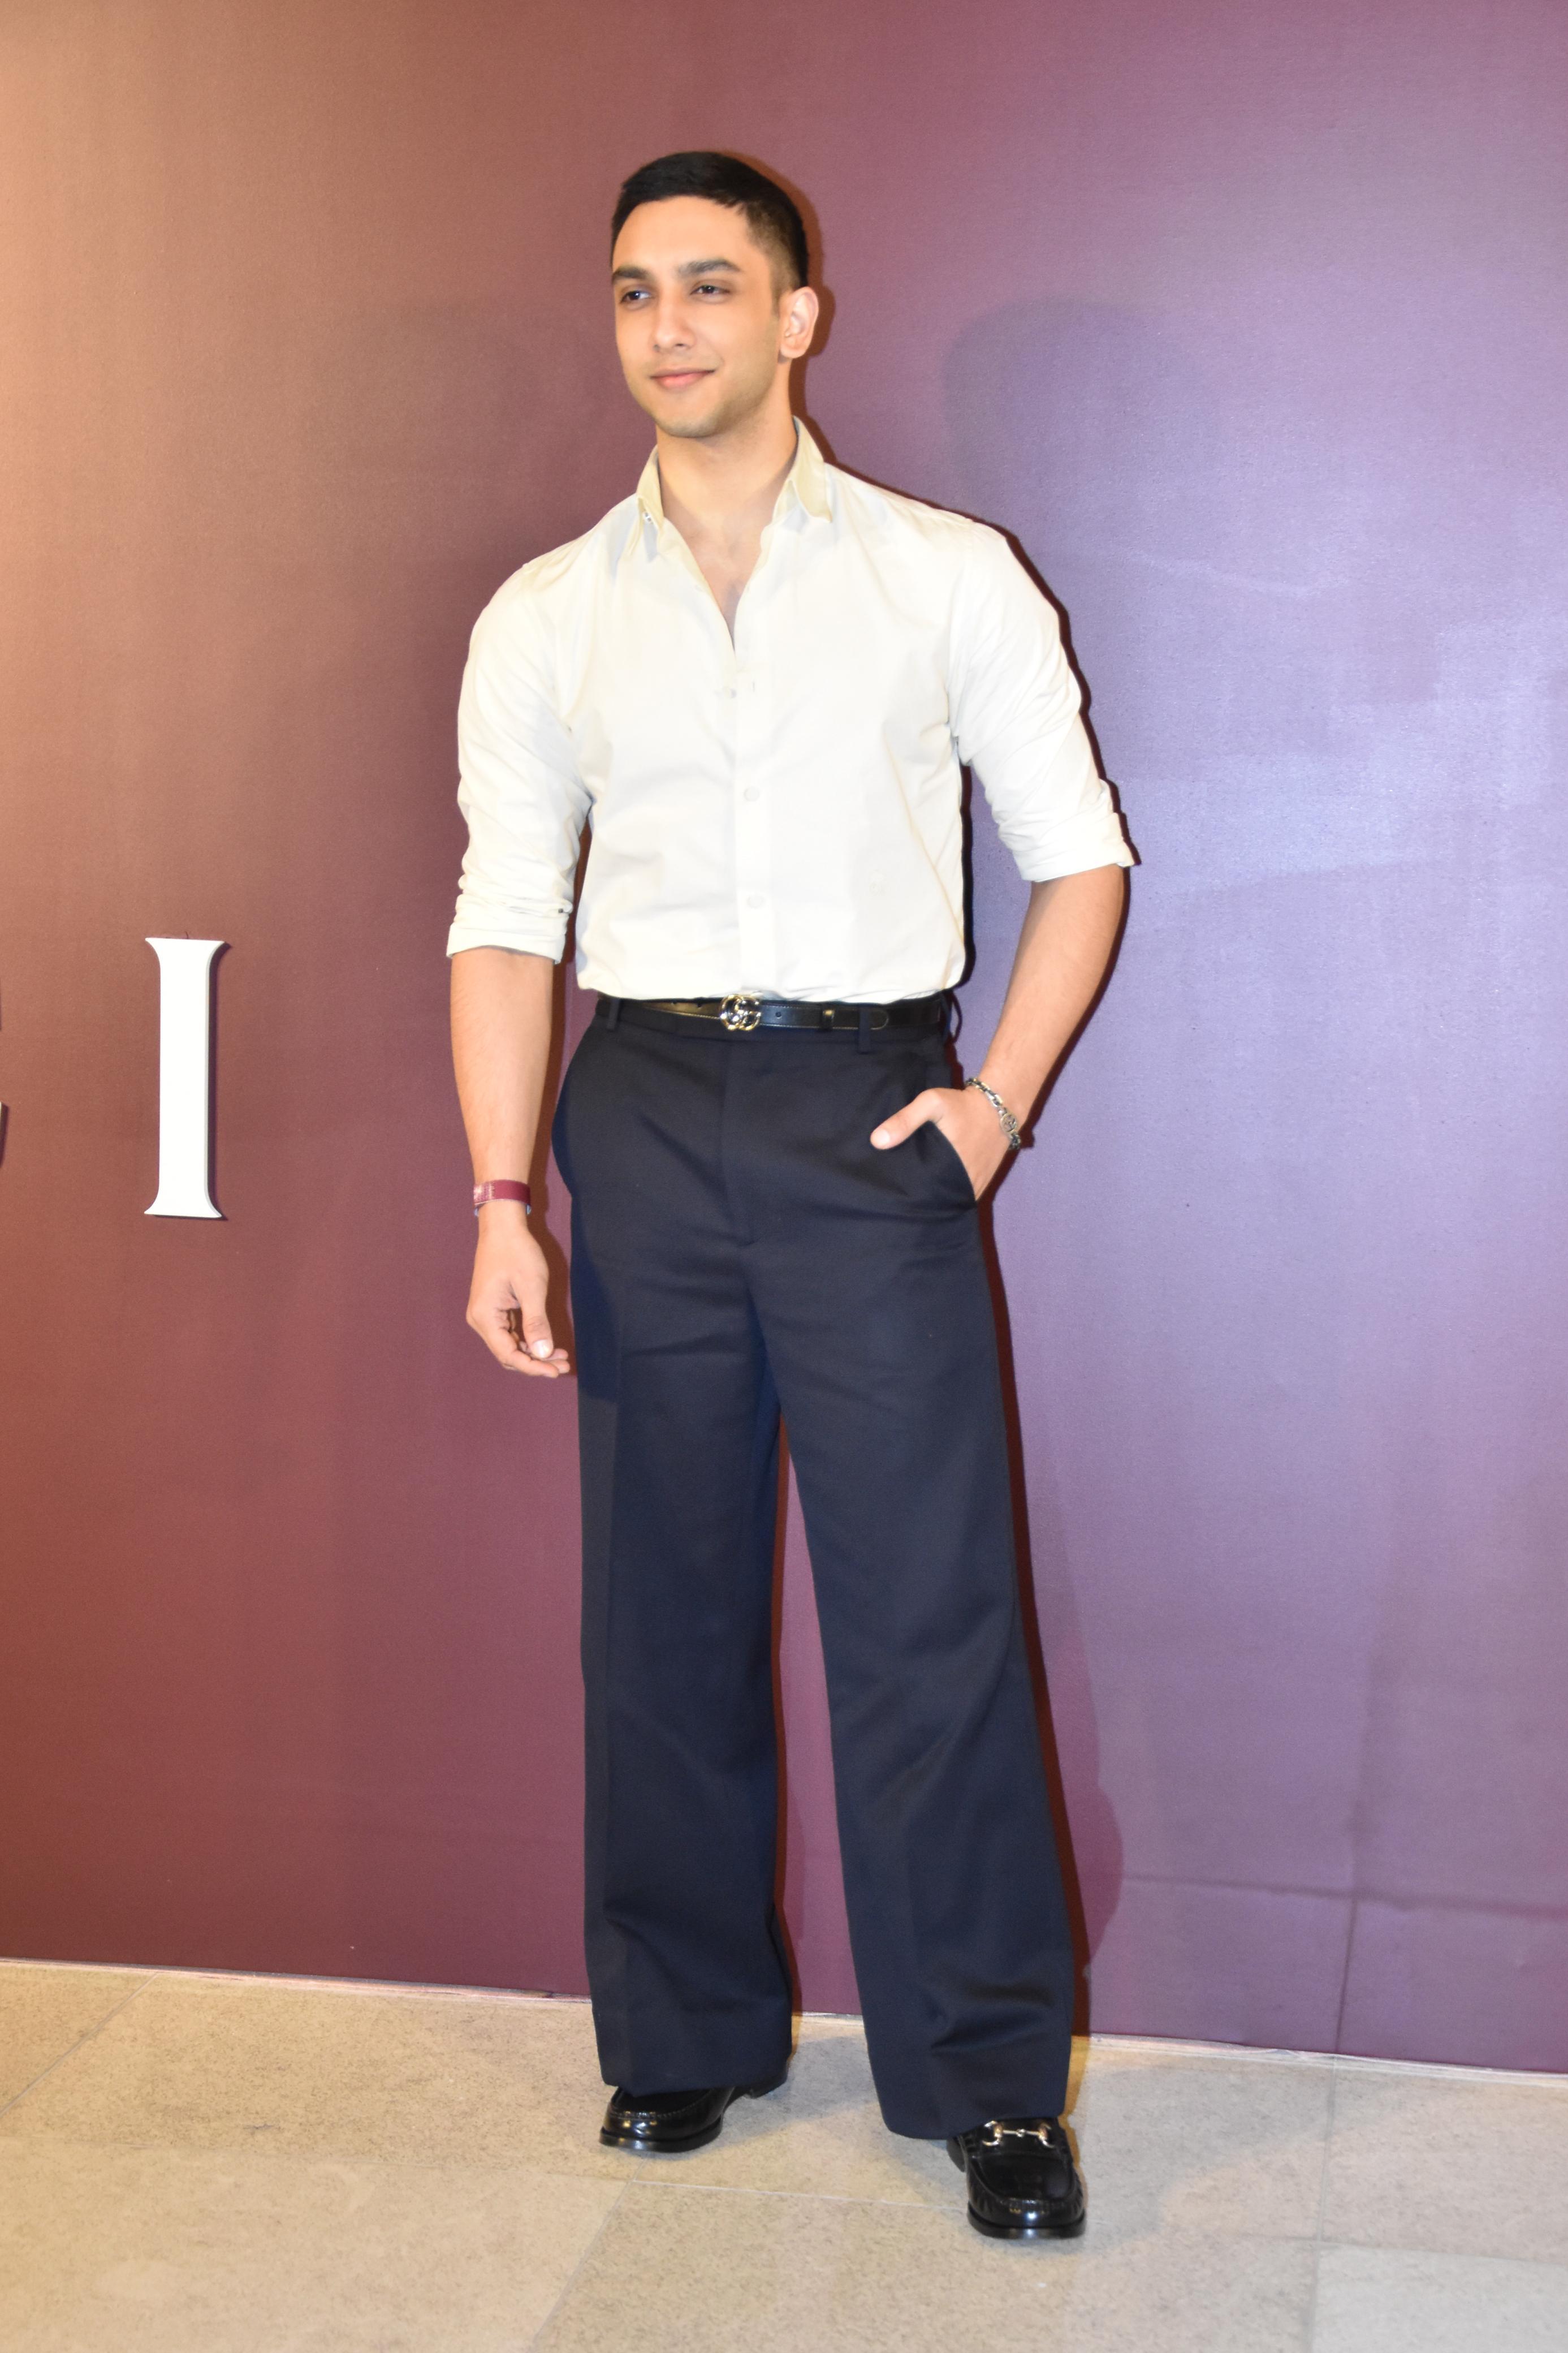 Vedang Raina has undoubtedly captivated his fans with his irresistible charm, donning a sharp white shirt elegantly paired with loose-fitting pants